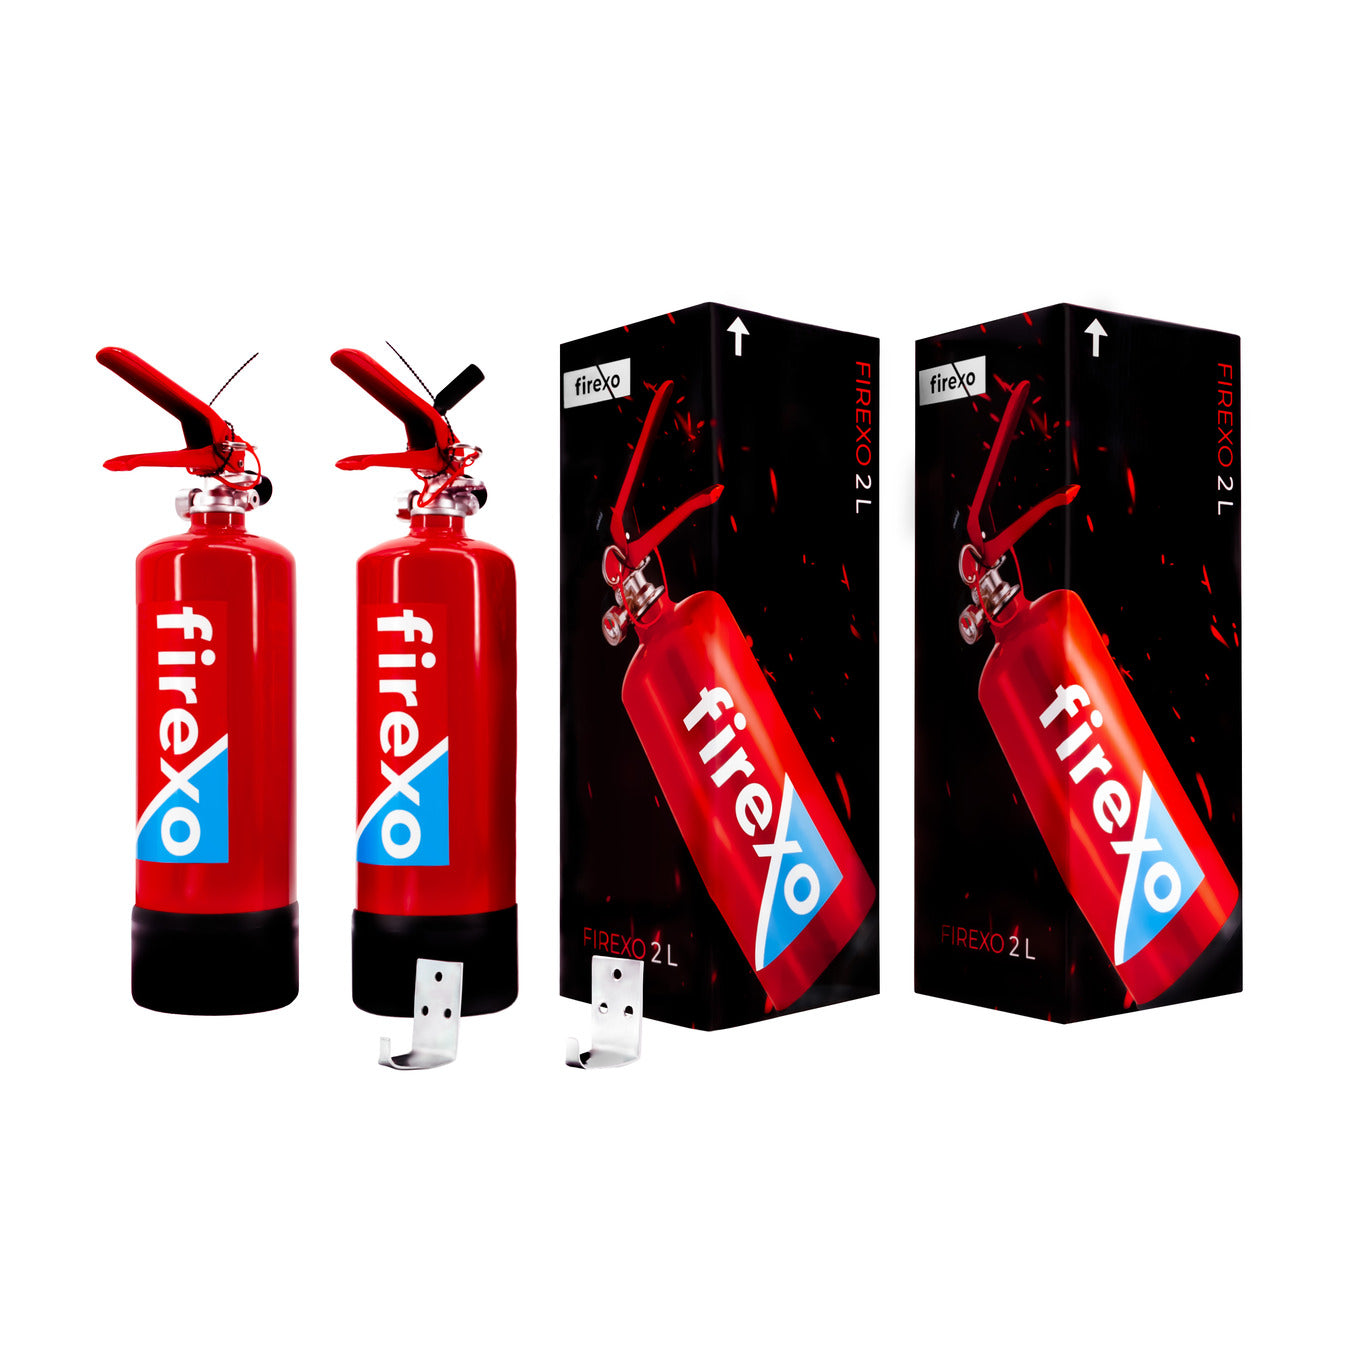 Firexo 2 Litre  Extinguishers - Duo Pack